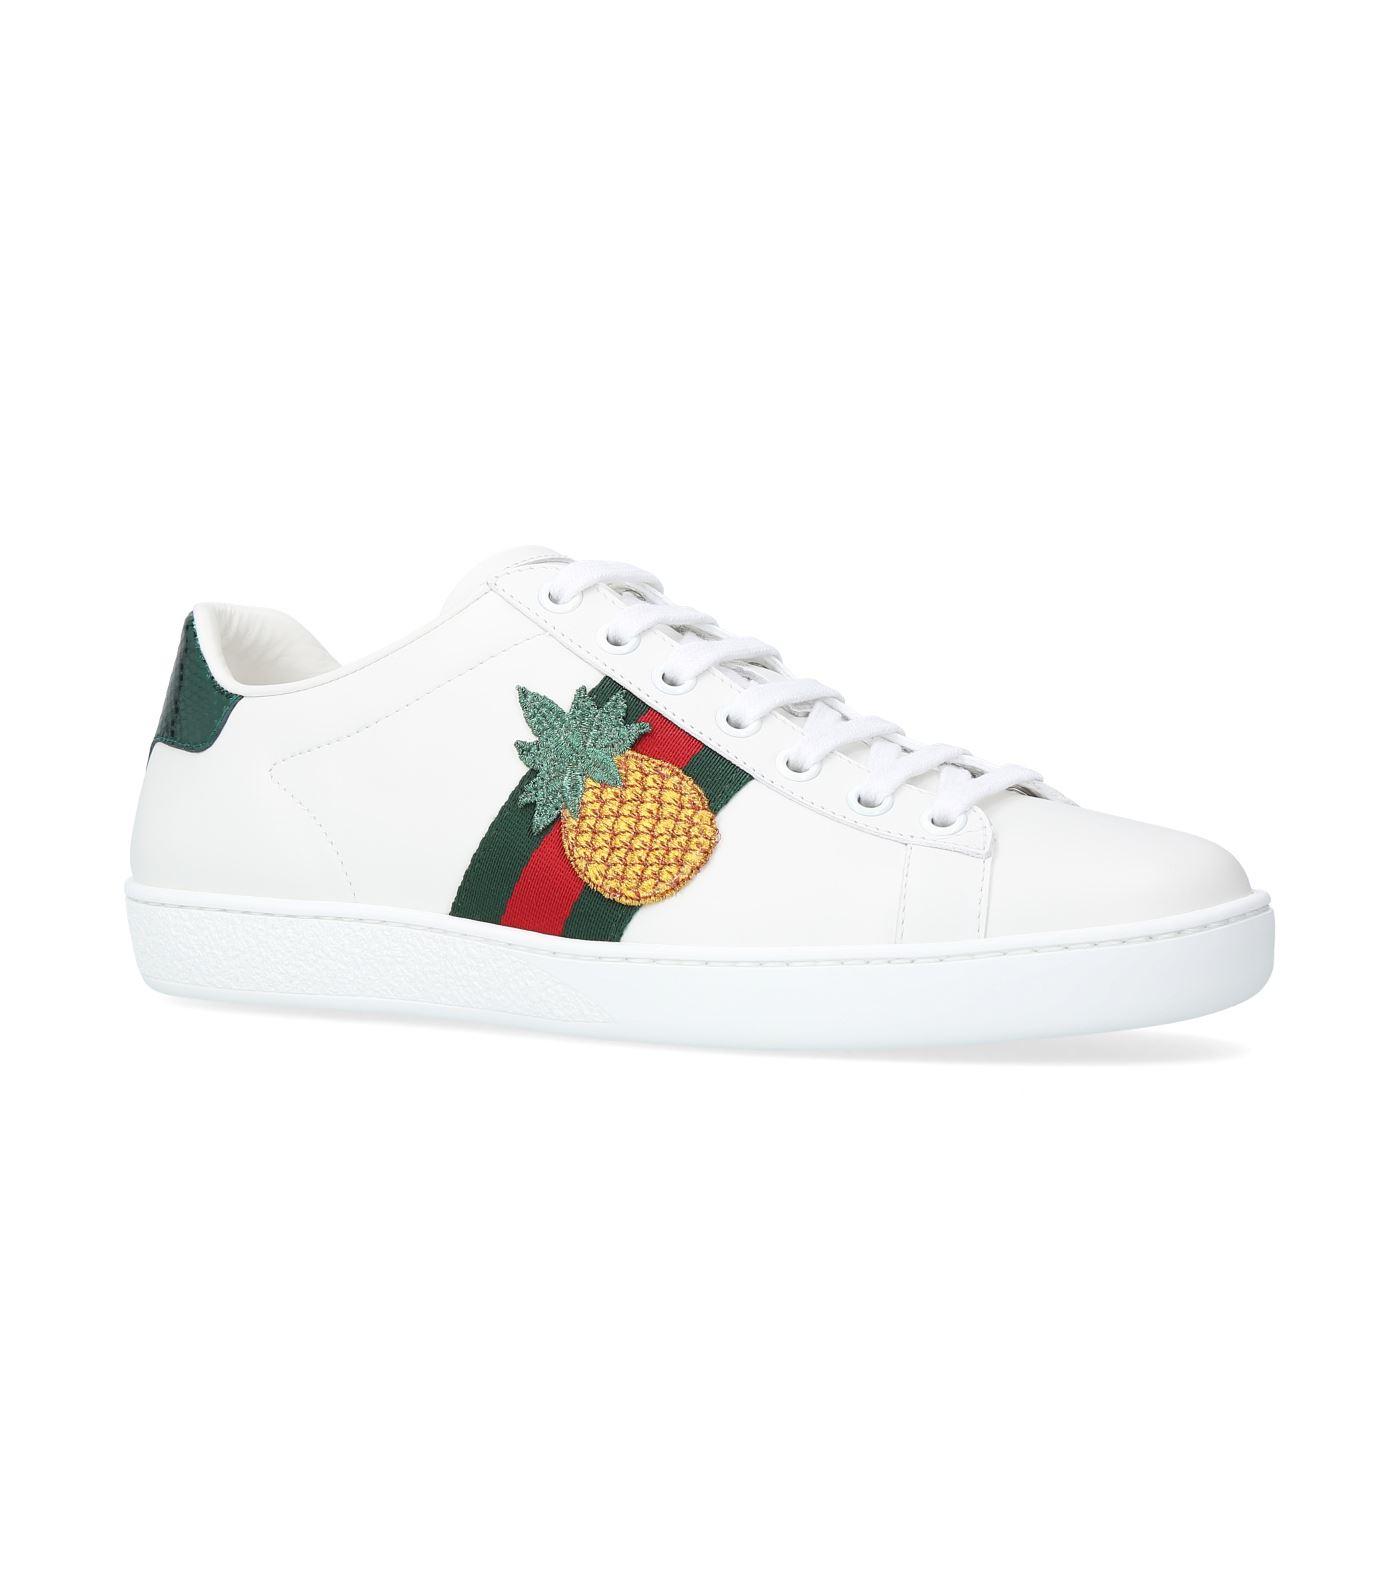 Gucci Leather New Ace Pineapple 